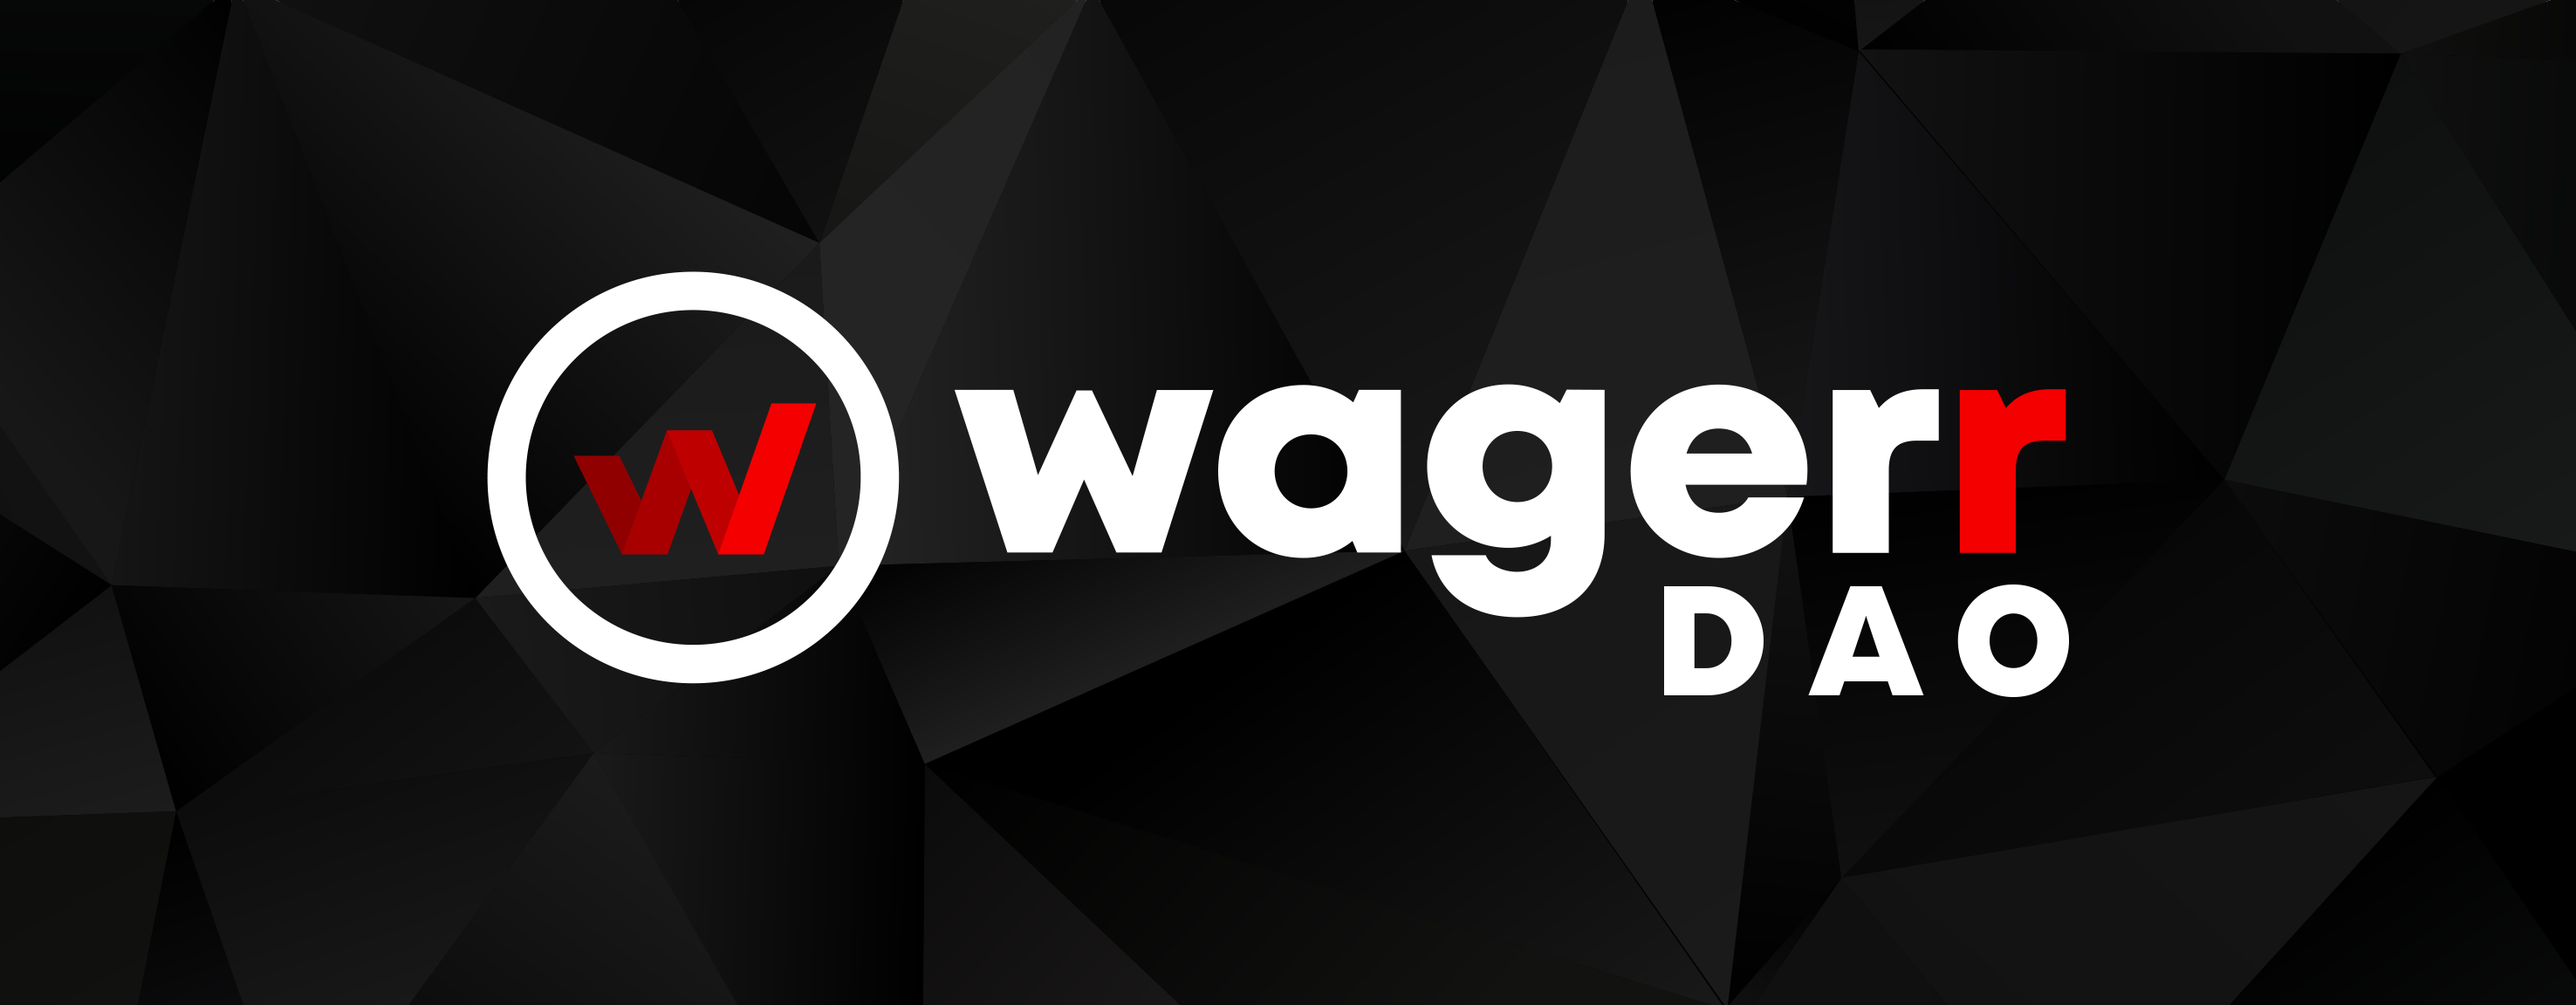 Introducing Wagerr DAO